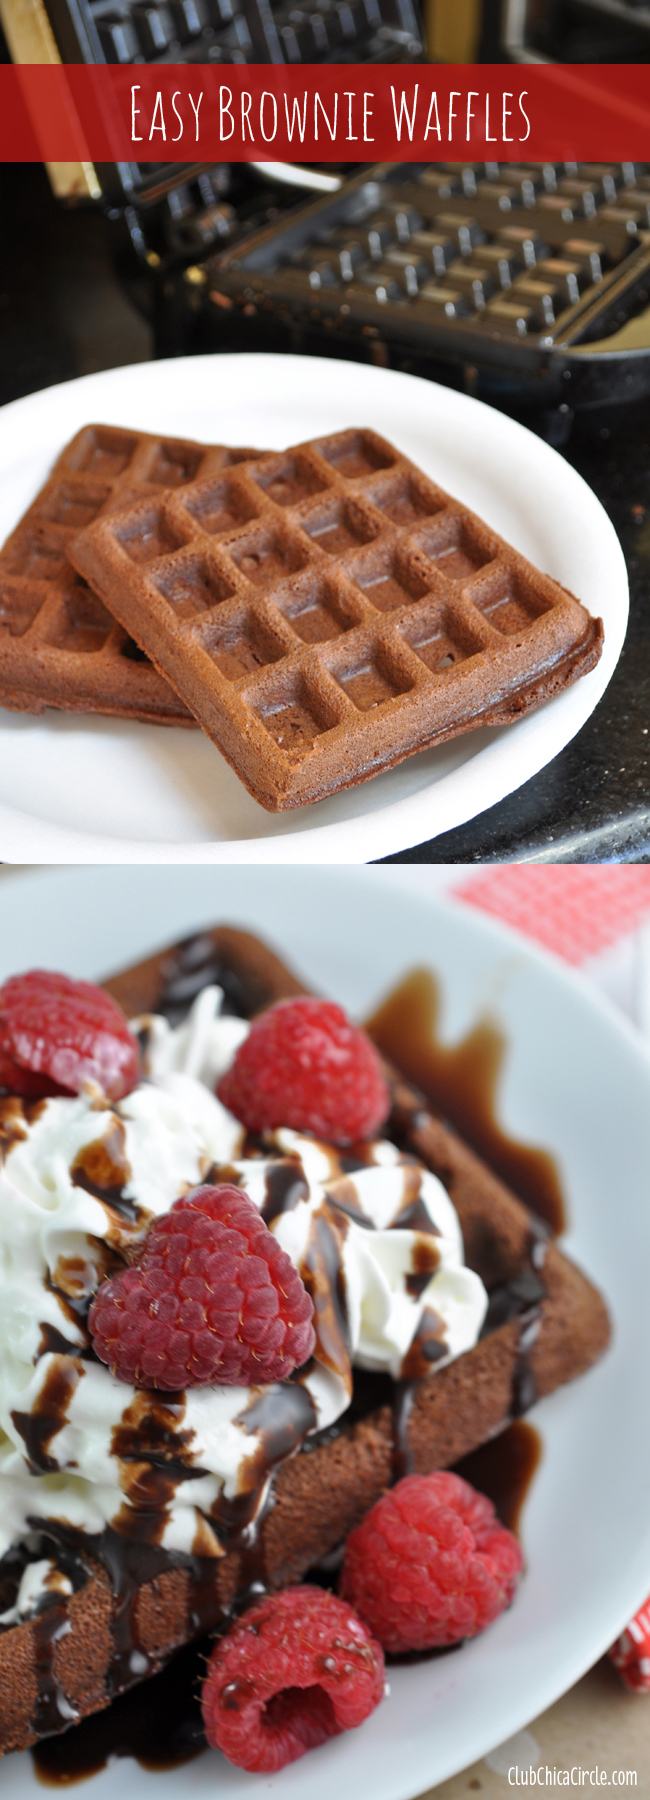 how to make brownie waffles that are so easy and yummy